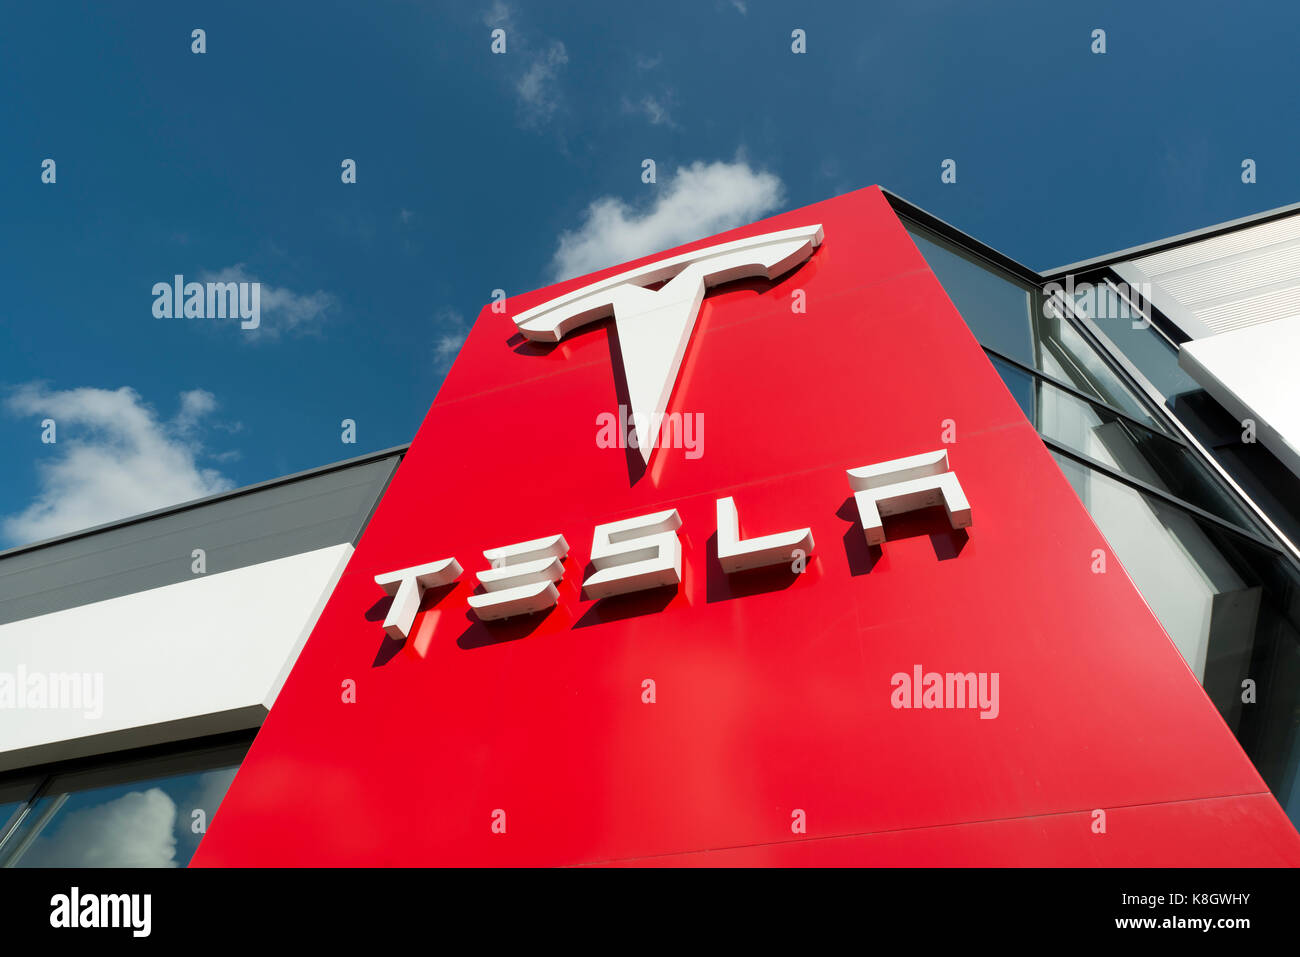 The signage for a Tesla car showroom located in Heaton Chapel and listed as South Manchester, in the UK (Editorial use only). Stock Photo